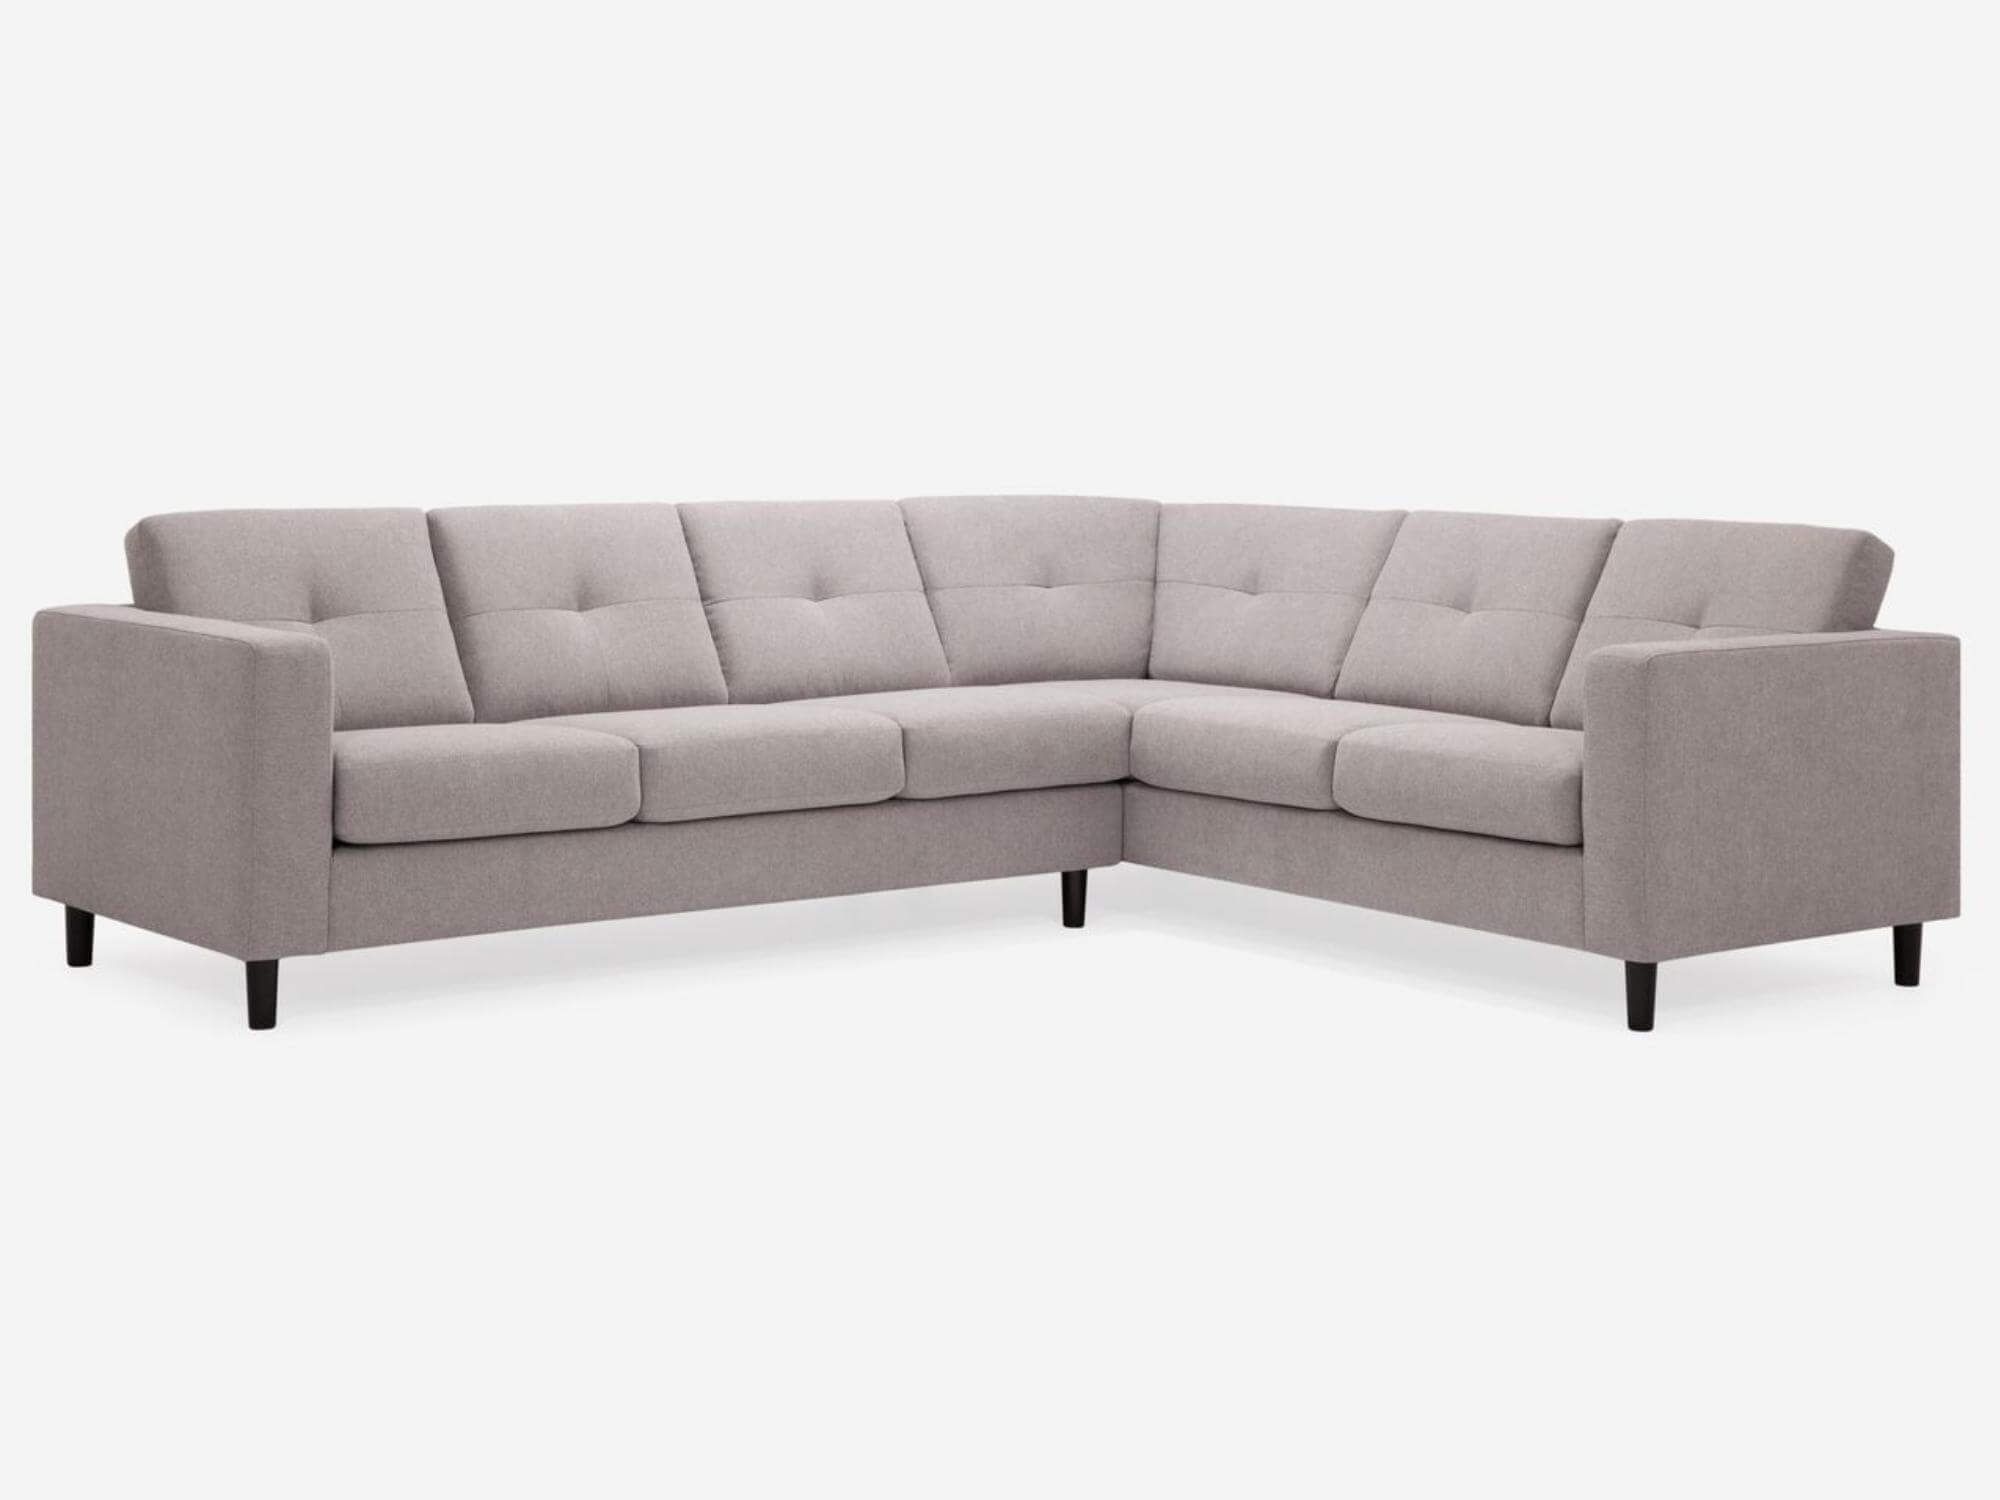 Eq3 Solo 6 Seat Sectional Sofa | Living Room Furniture Online Inside 6 Seater Sectional Couches (View 10 of 15)